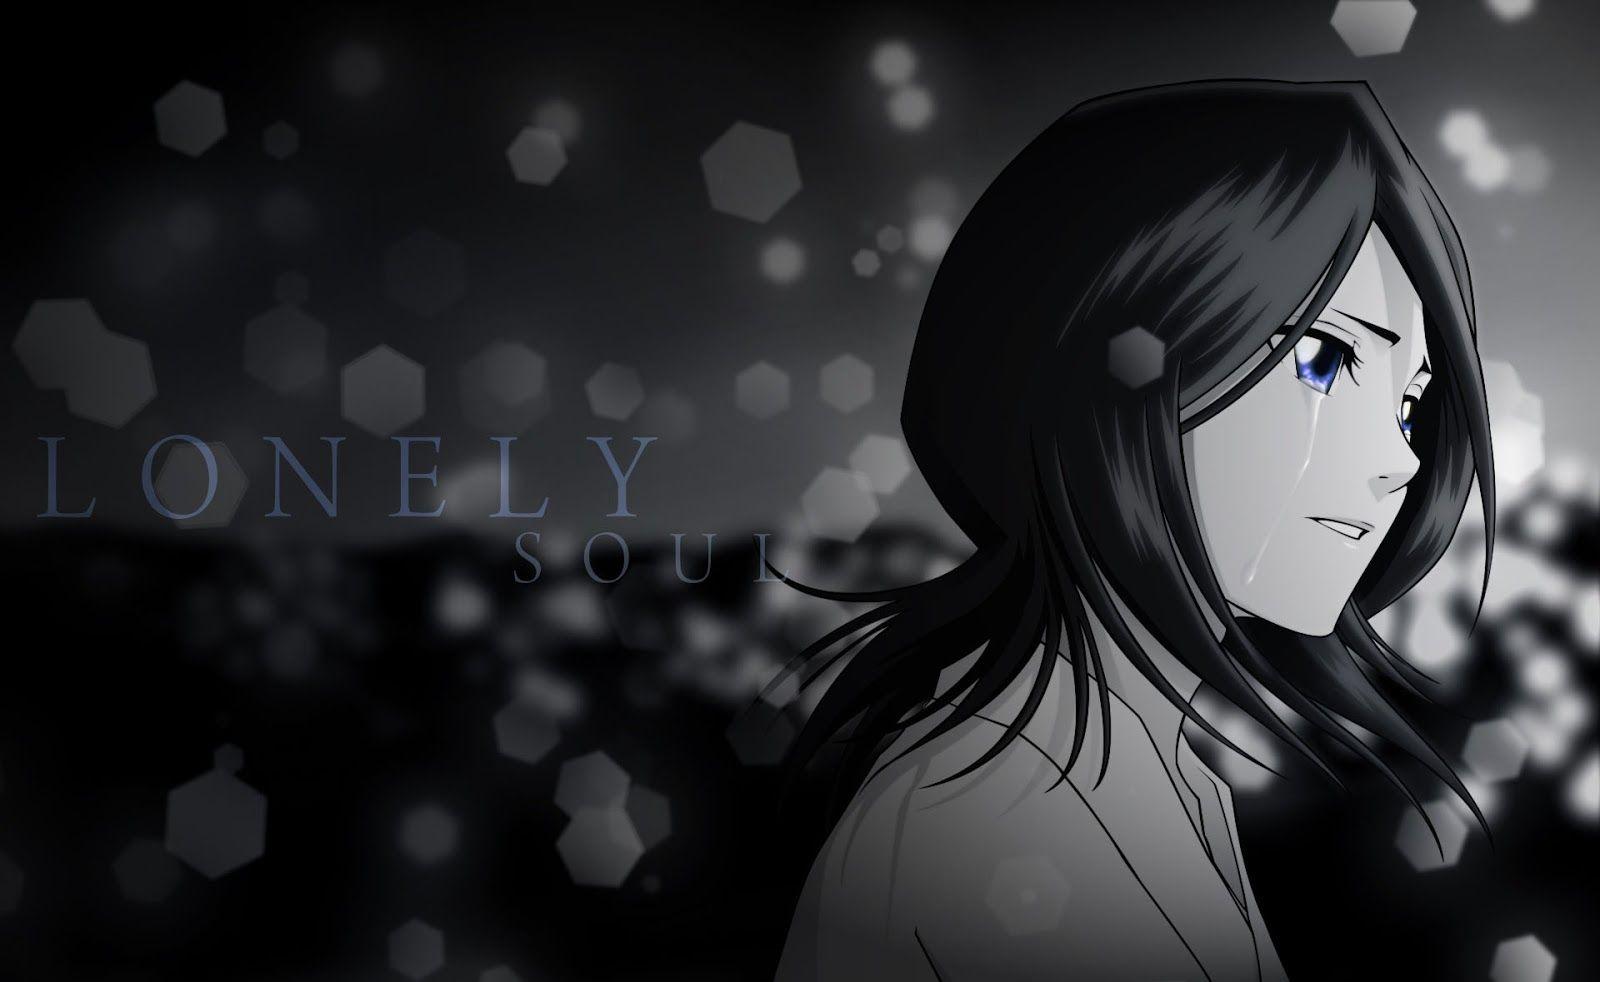 Lonely Soul Girl Anime Image Hd Wallpaper Love Failure Picture